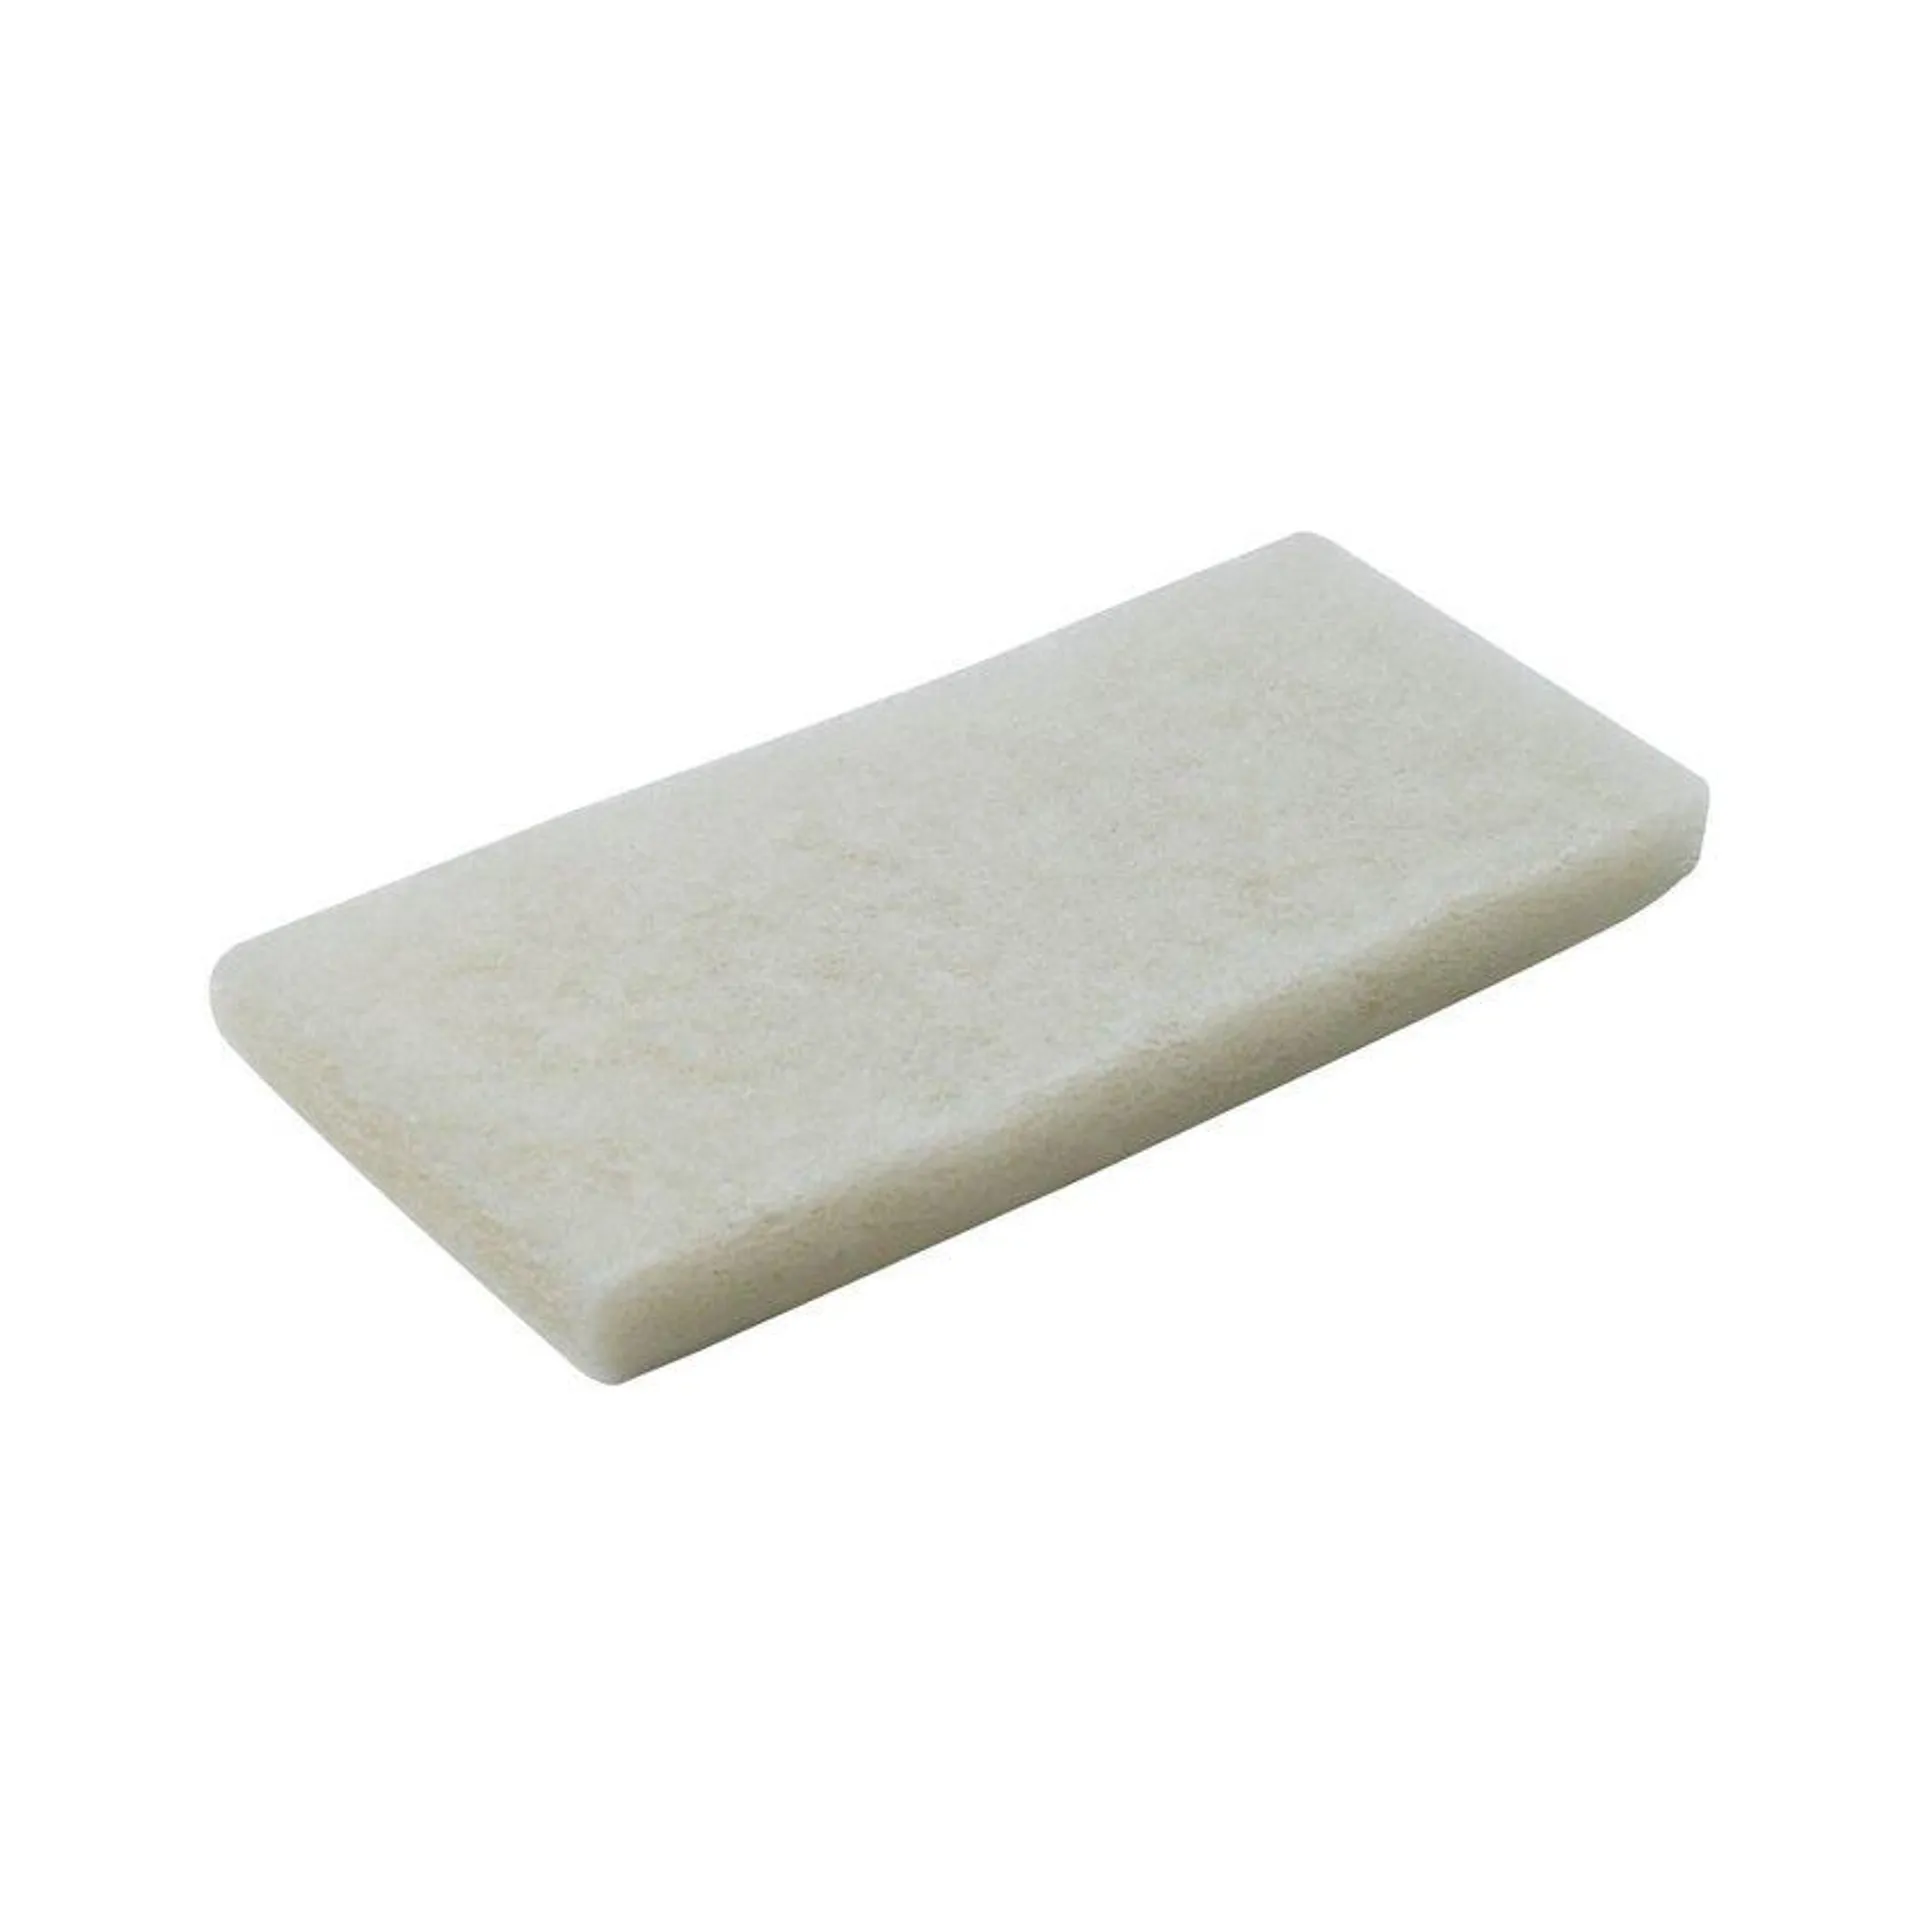 3M Doodlebug Cleaning Pads